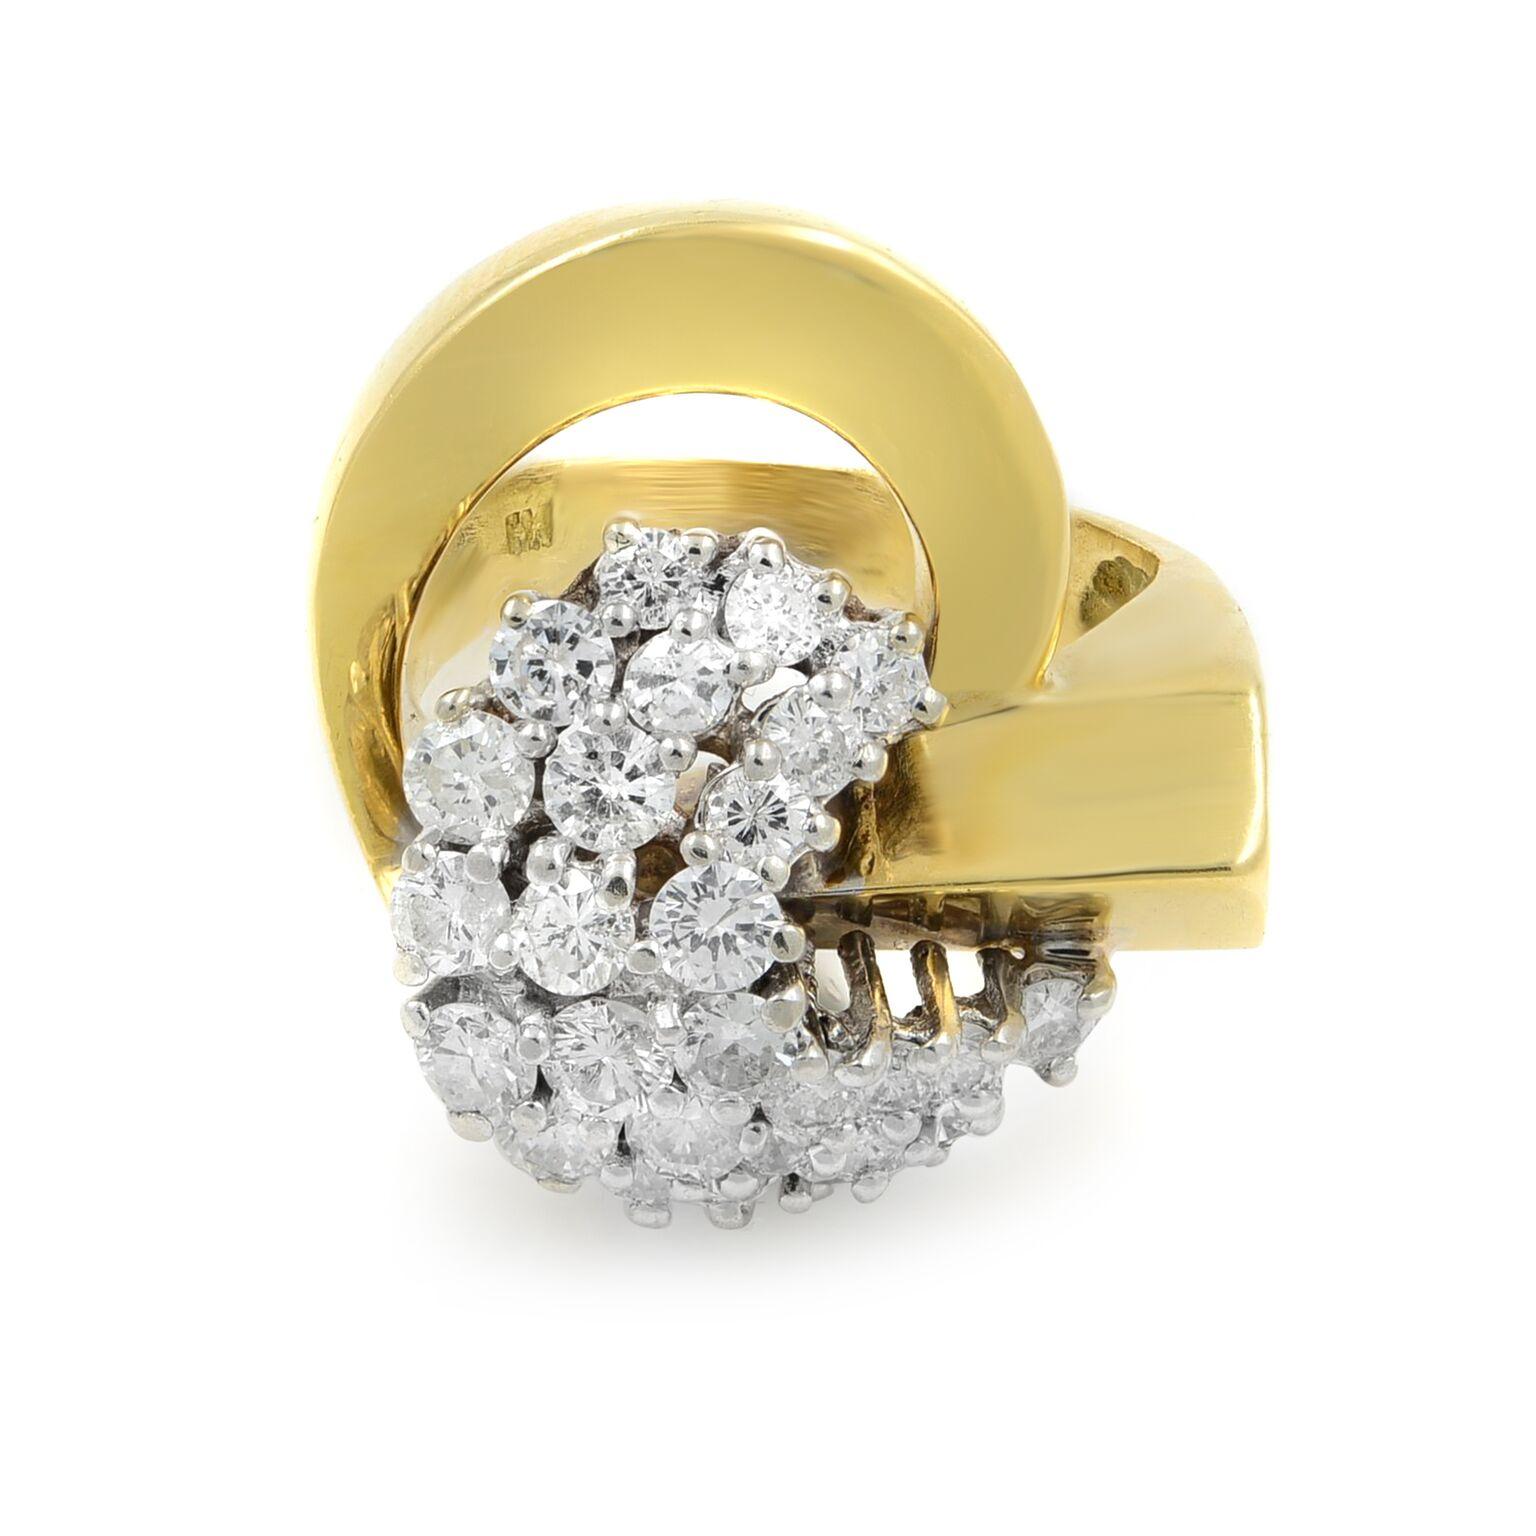 This stunning vintage cocktail ring features three rows of prong-set round brilliant cut diamonds weighing 1.65 carats with VS Clarity and G Color. The 18k yellow gold mounting is solid, extremely well made and polished. The ring weight is 10.34